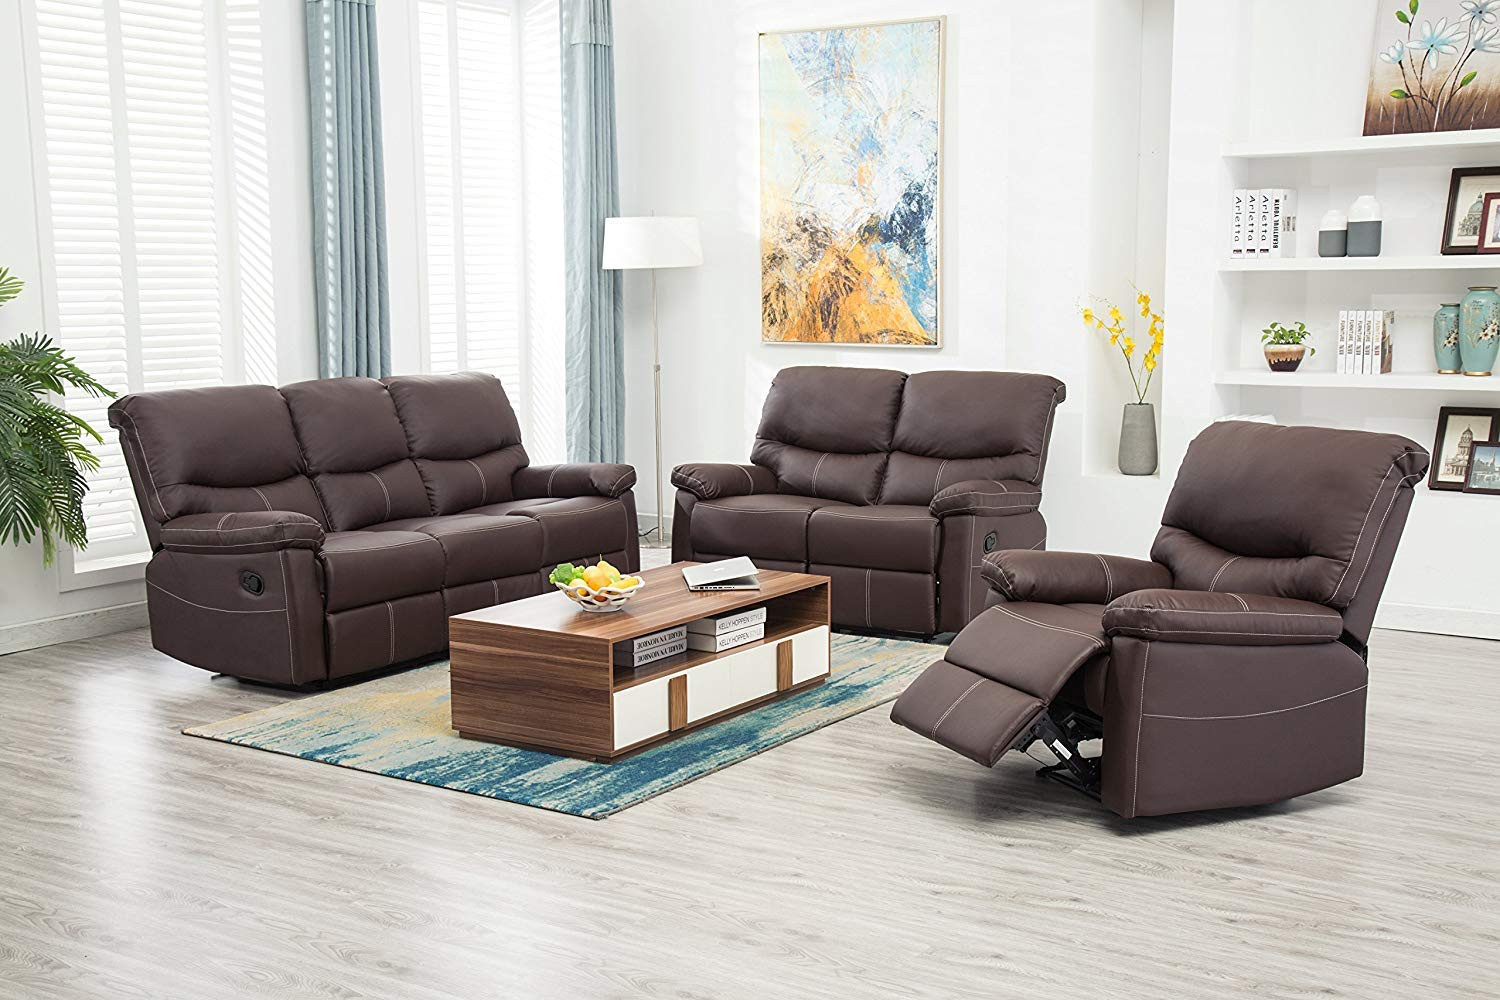 Amazon Living Room Sets With Sectional Sofa